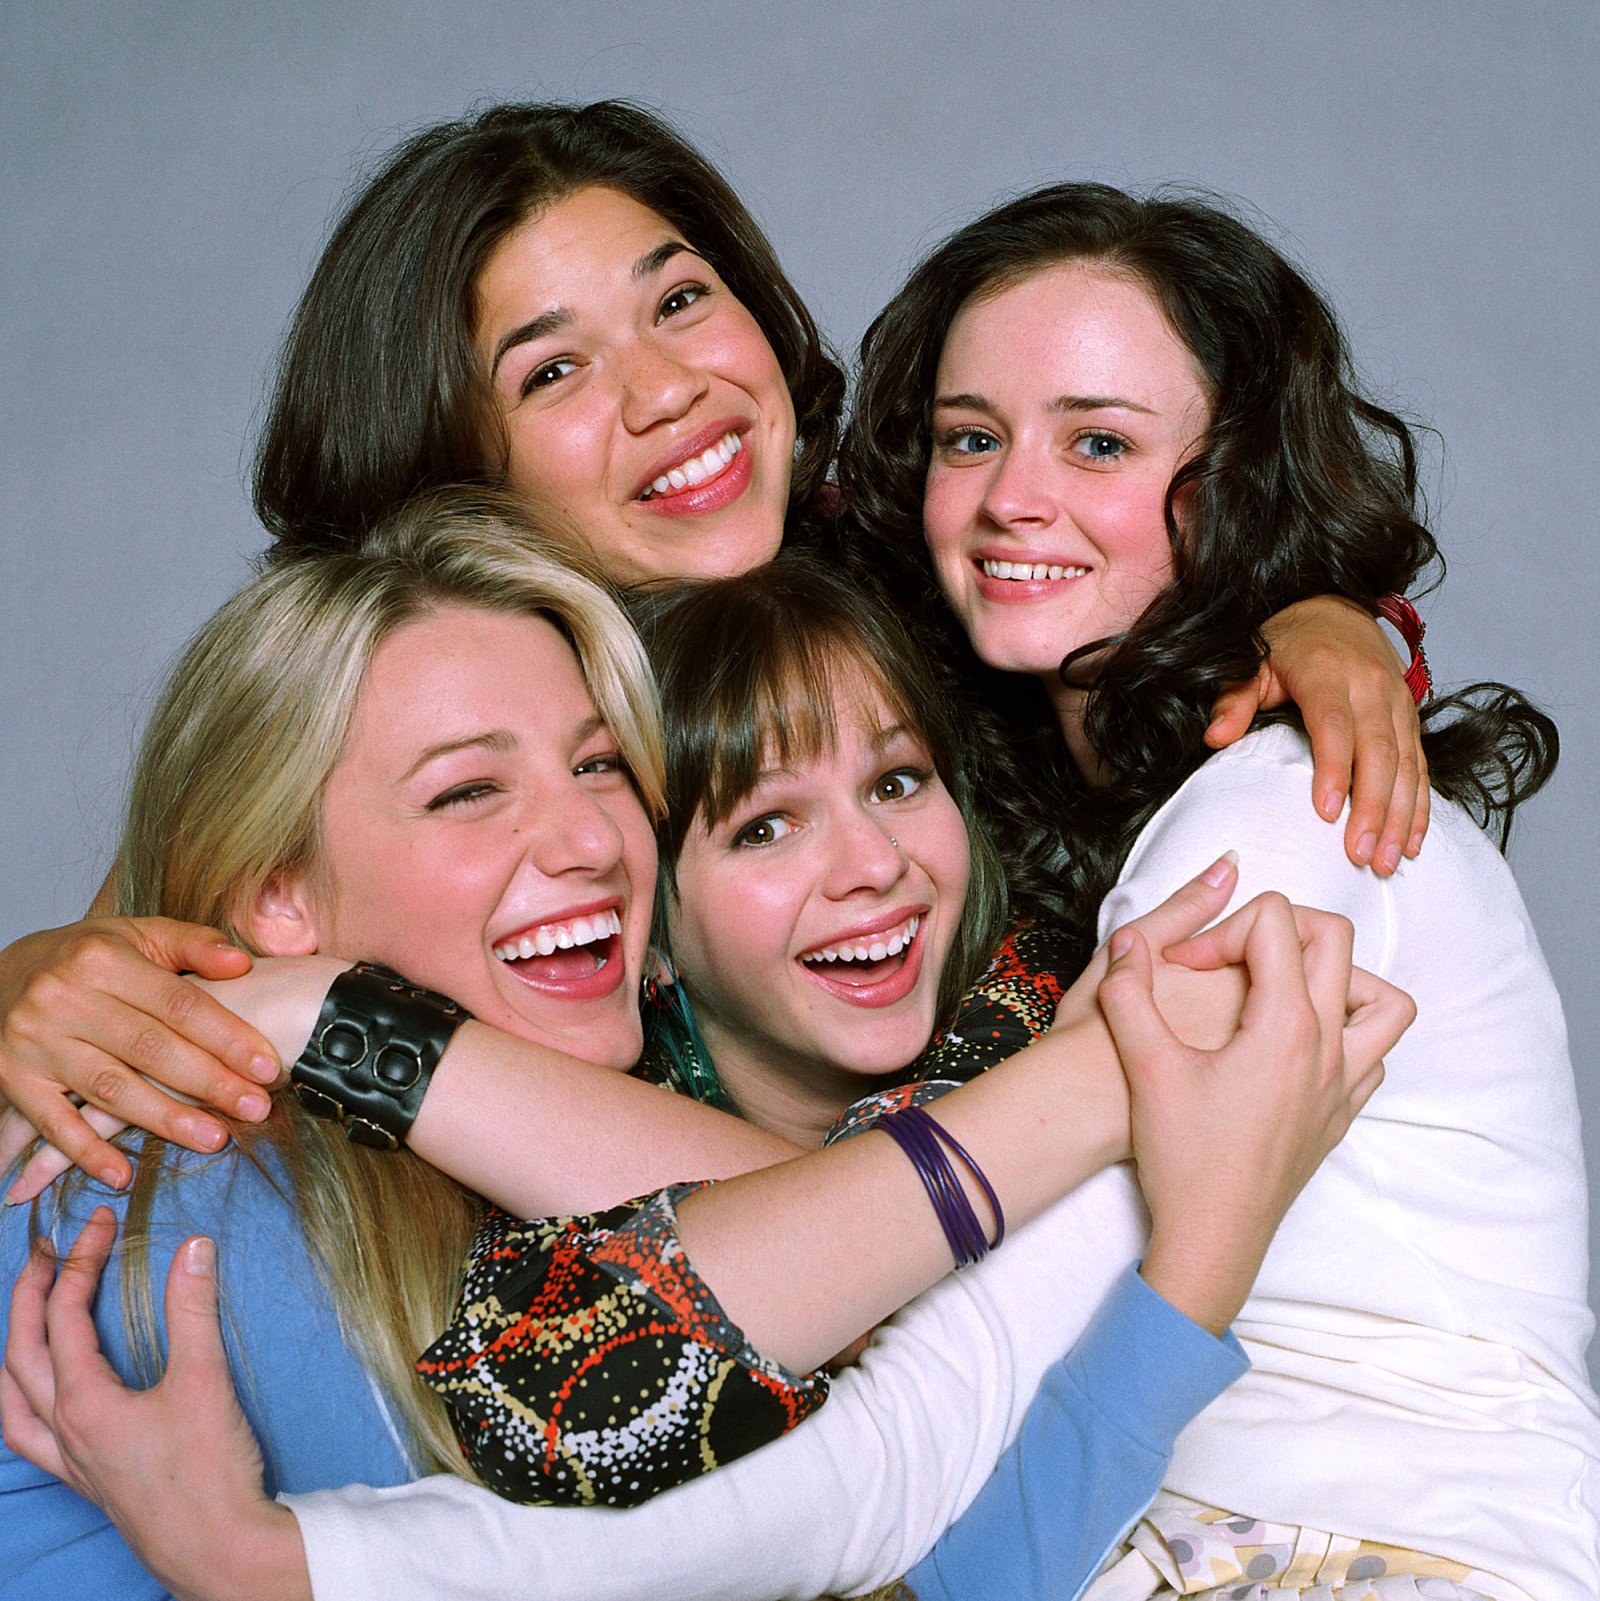 Blake Lively, America Ferrera, Amber Tamblyn, Alexis Bledel Sisterhood of the Traveling Pants Where Are They Now